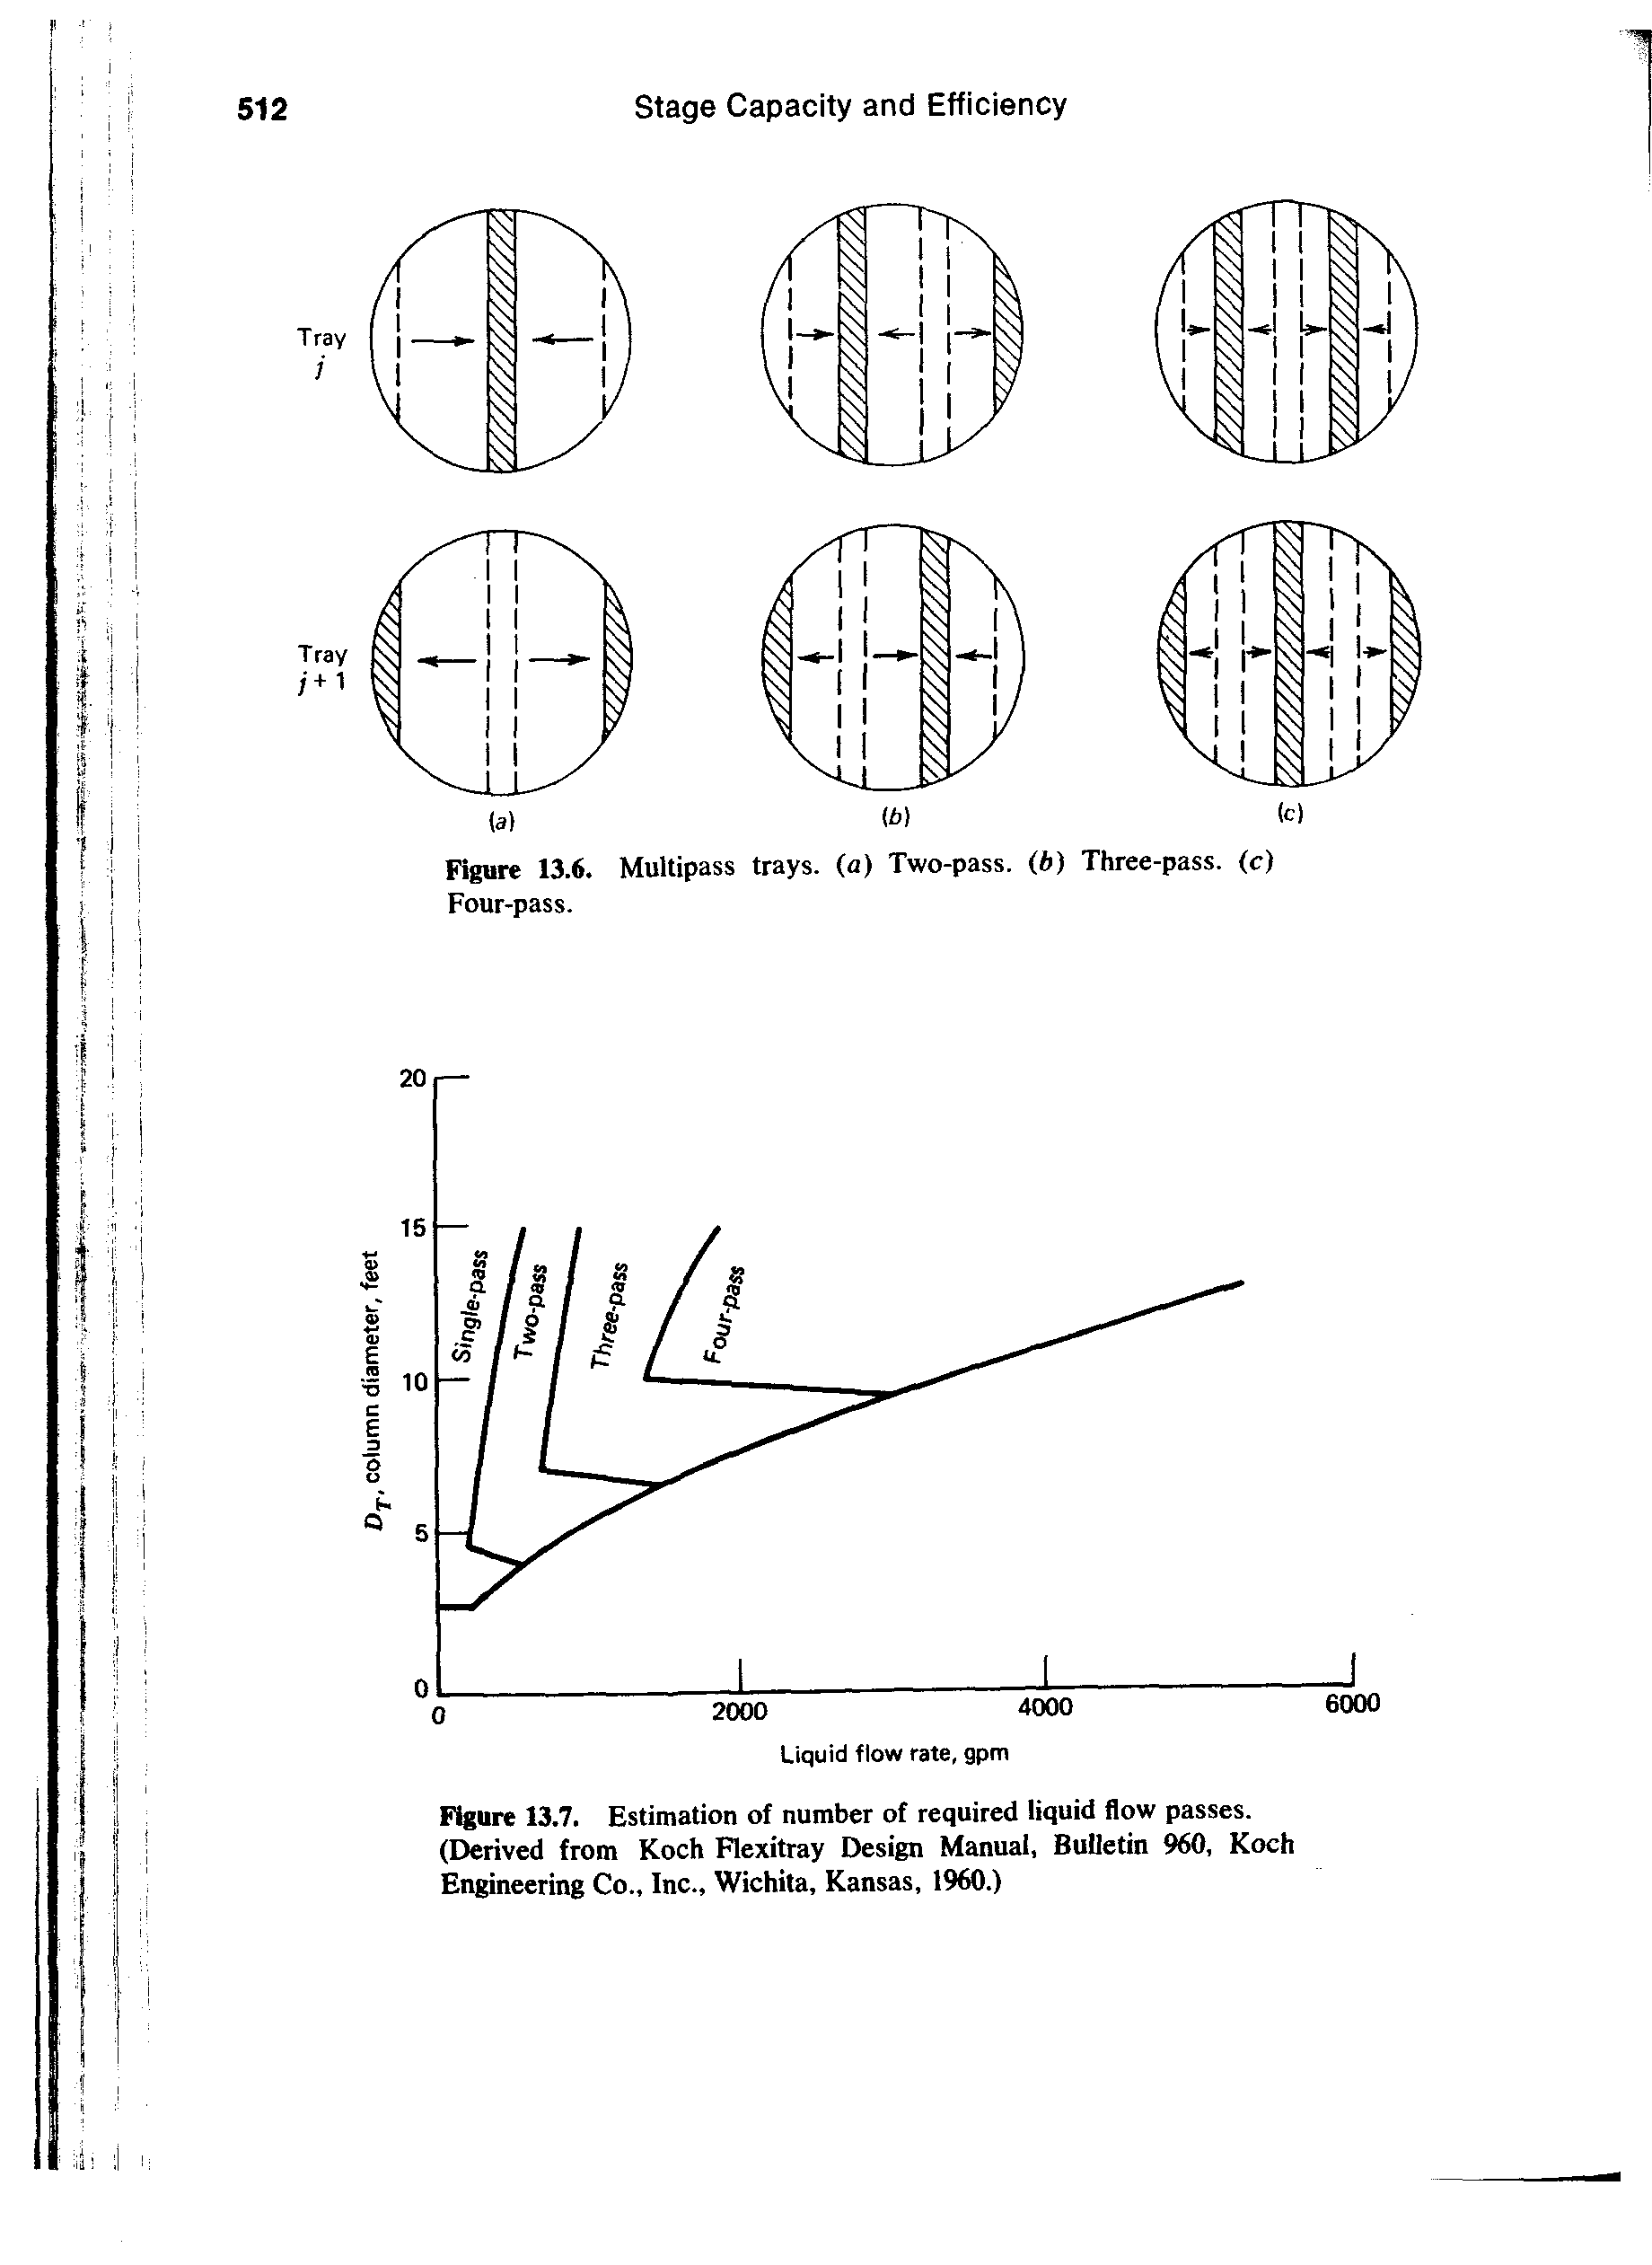 Figure 13.7. Estimation of number of required liquid flow passes. (Derived from Koch Flexitray Design Manual, Bulletin 960, Koch Engineering Co., Inc., Wichita, Kansas, 1960.)...